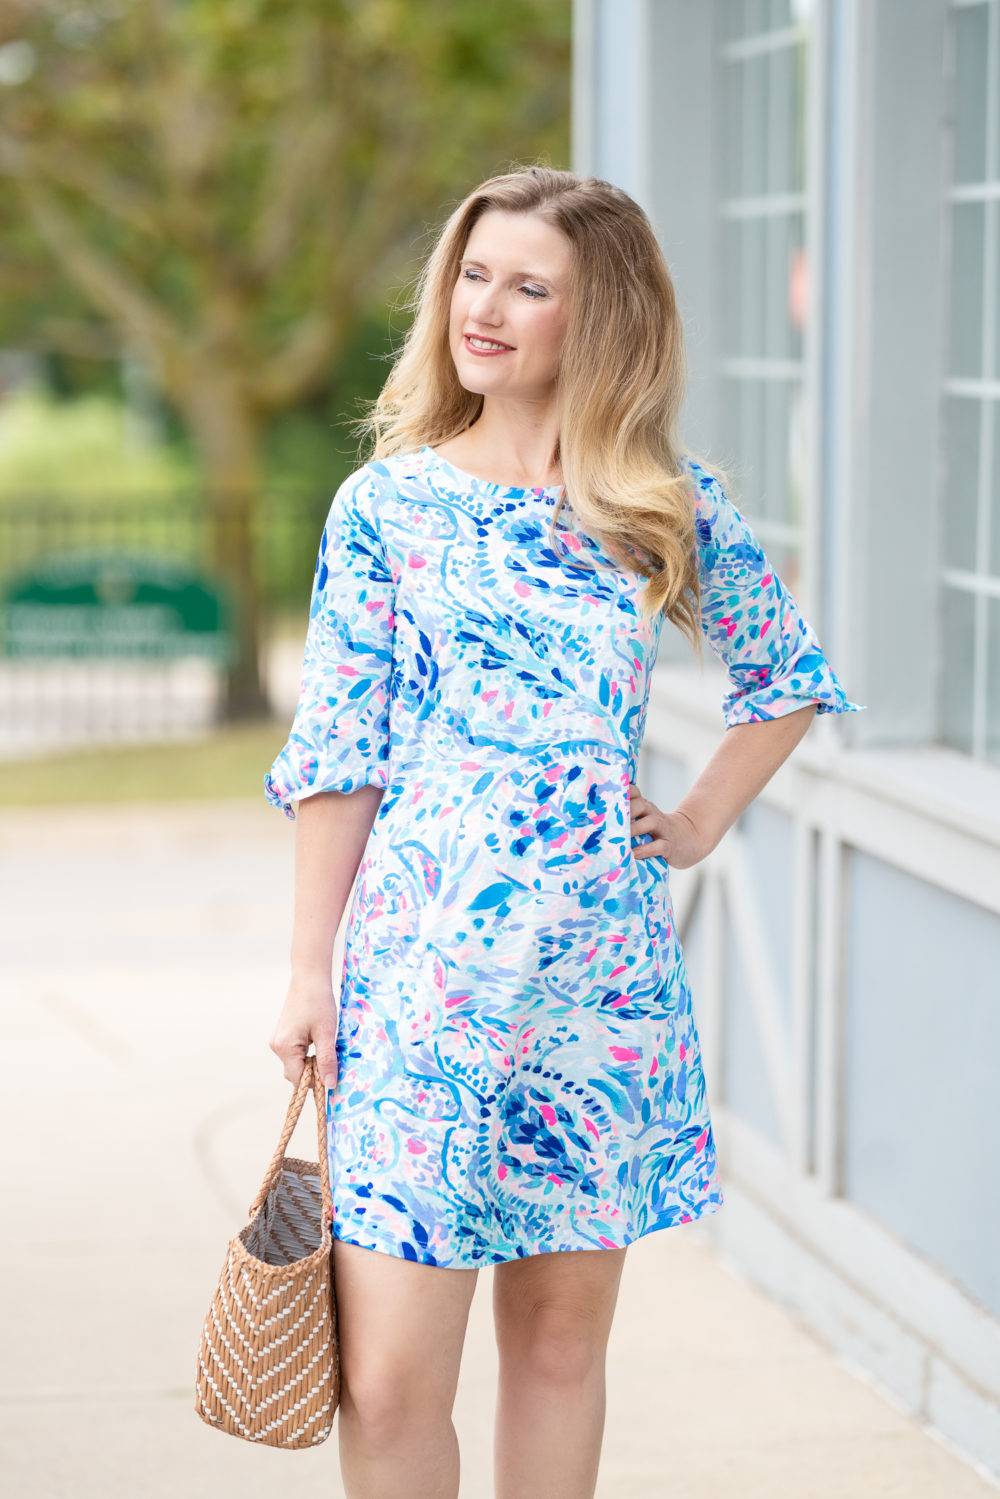 Petite Fashion Blog | Lilly Pulitzer Preston Dress | Lilly Pulitzer After the Party Sale